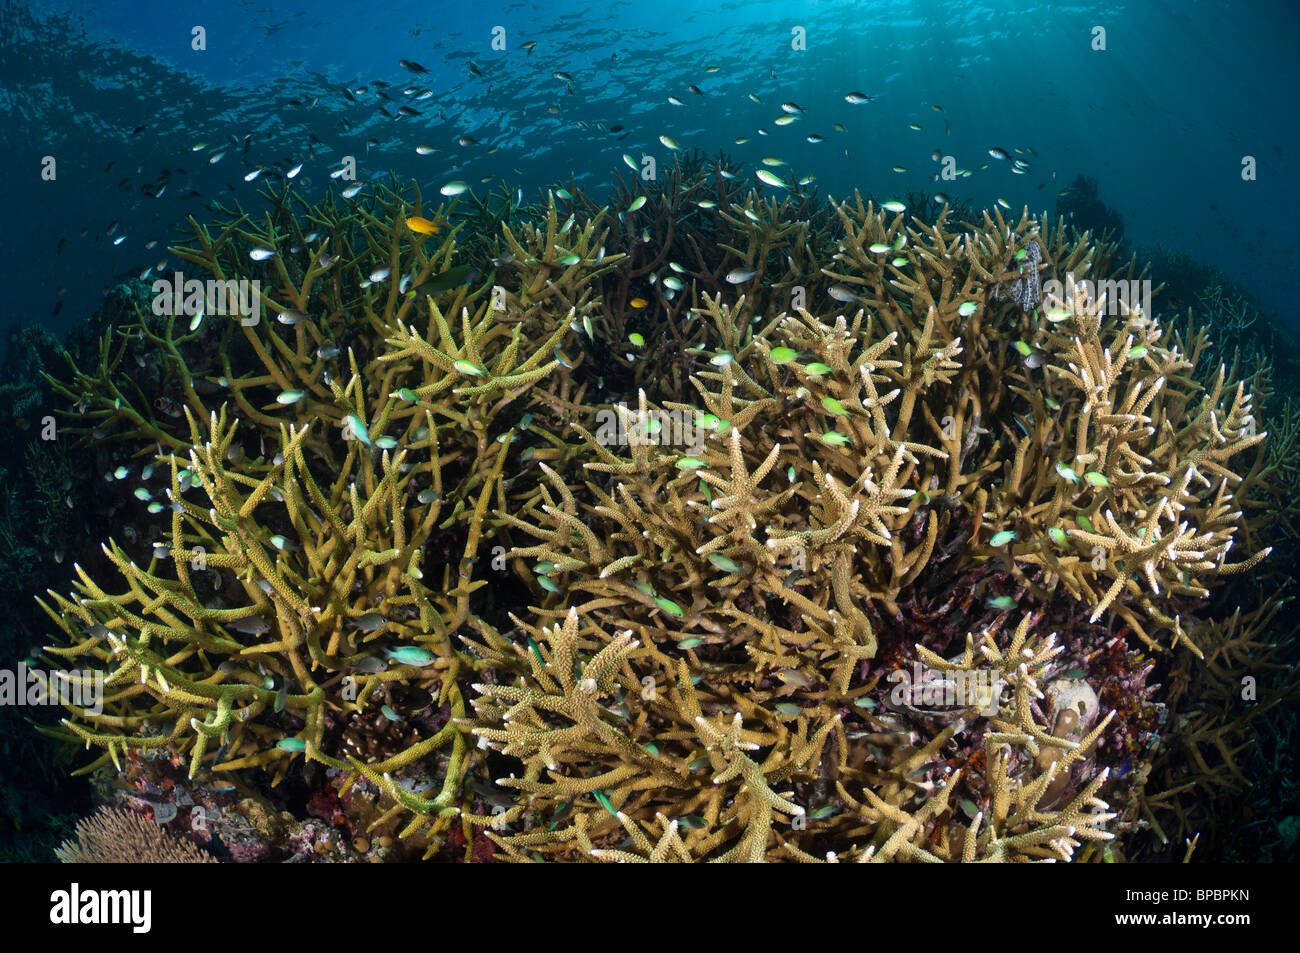 Staghorn coral and damselfish on a healthy reef, Misool, West Papua, Indonesia. Stock Photo